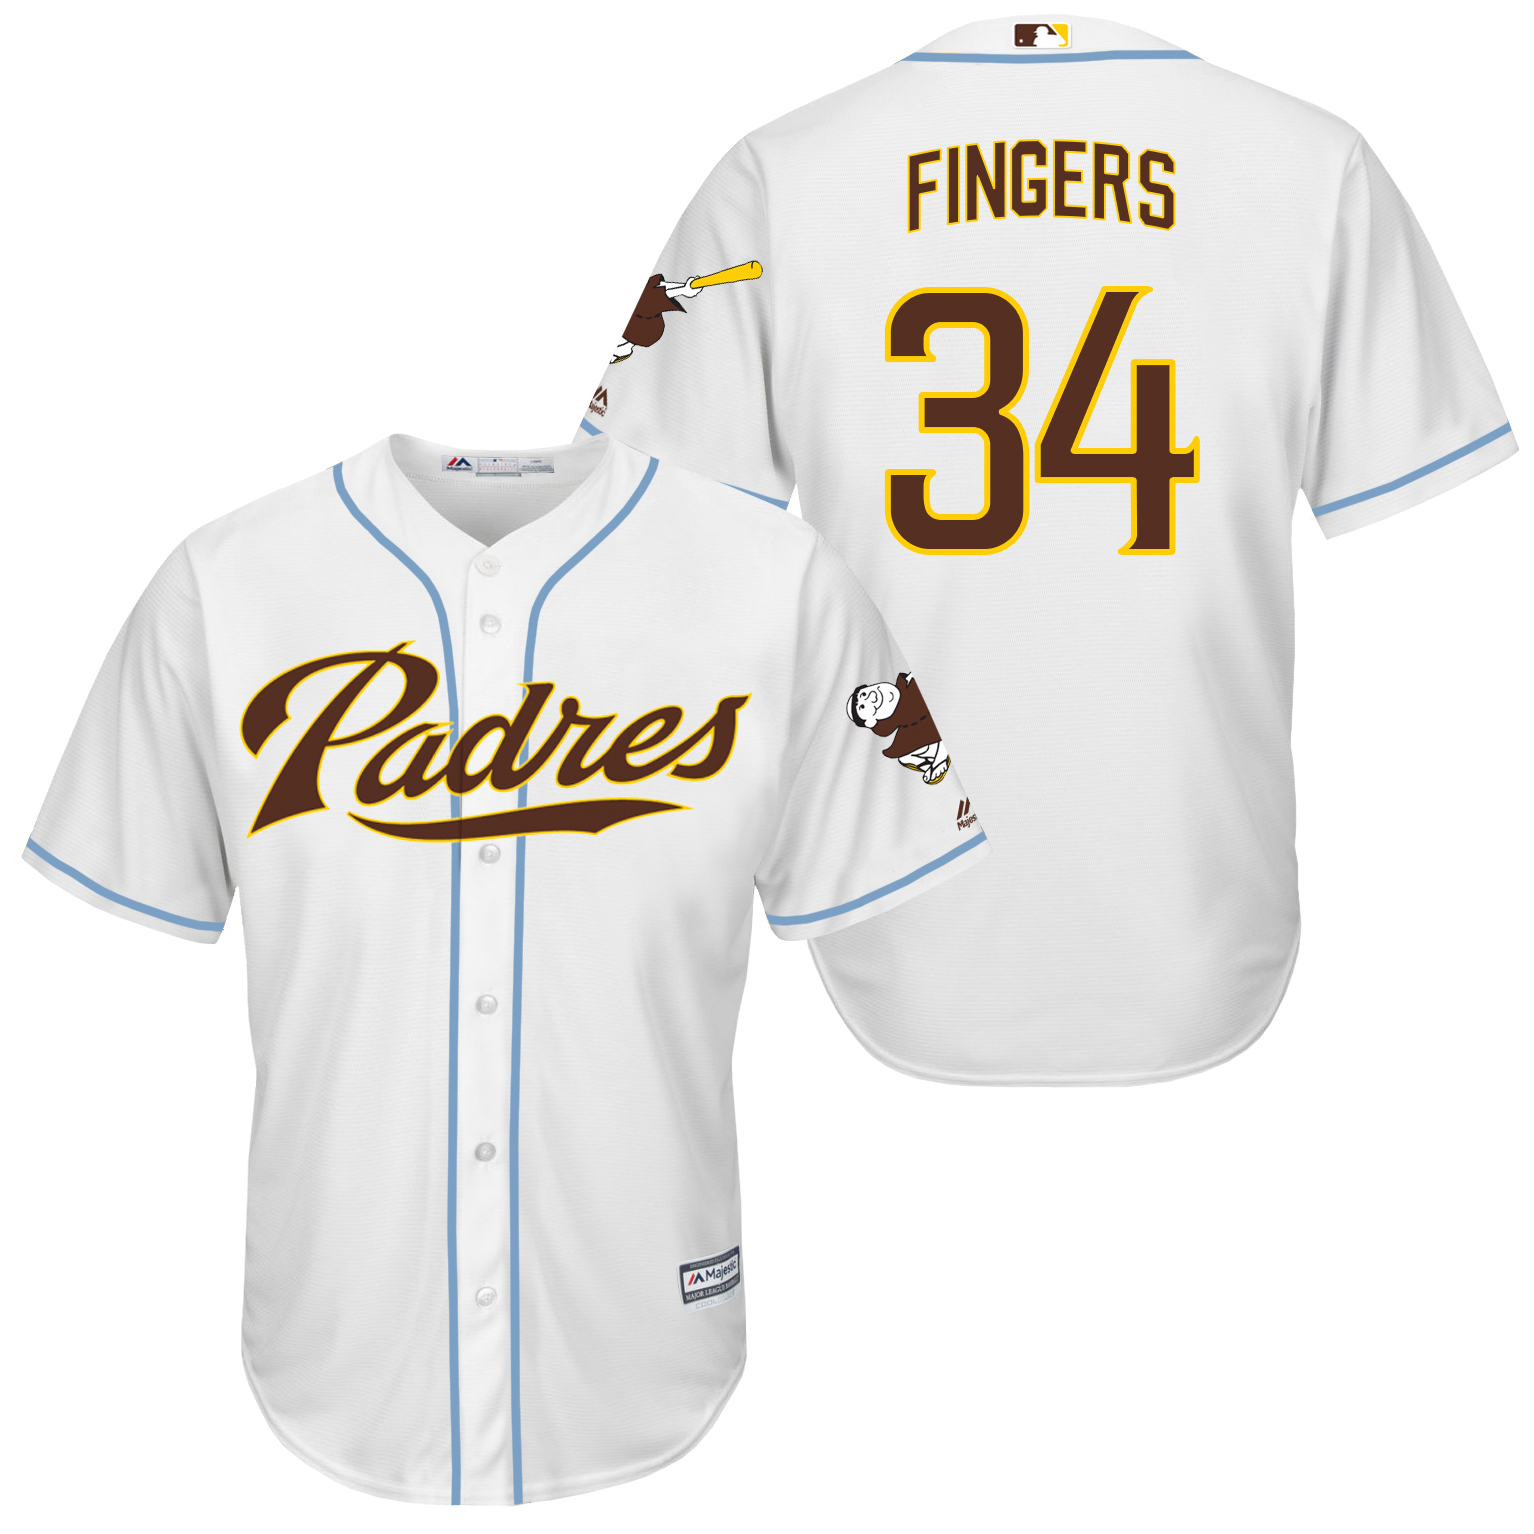 Padres 34 Rollie Fingers White New Cool Base Jersey